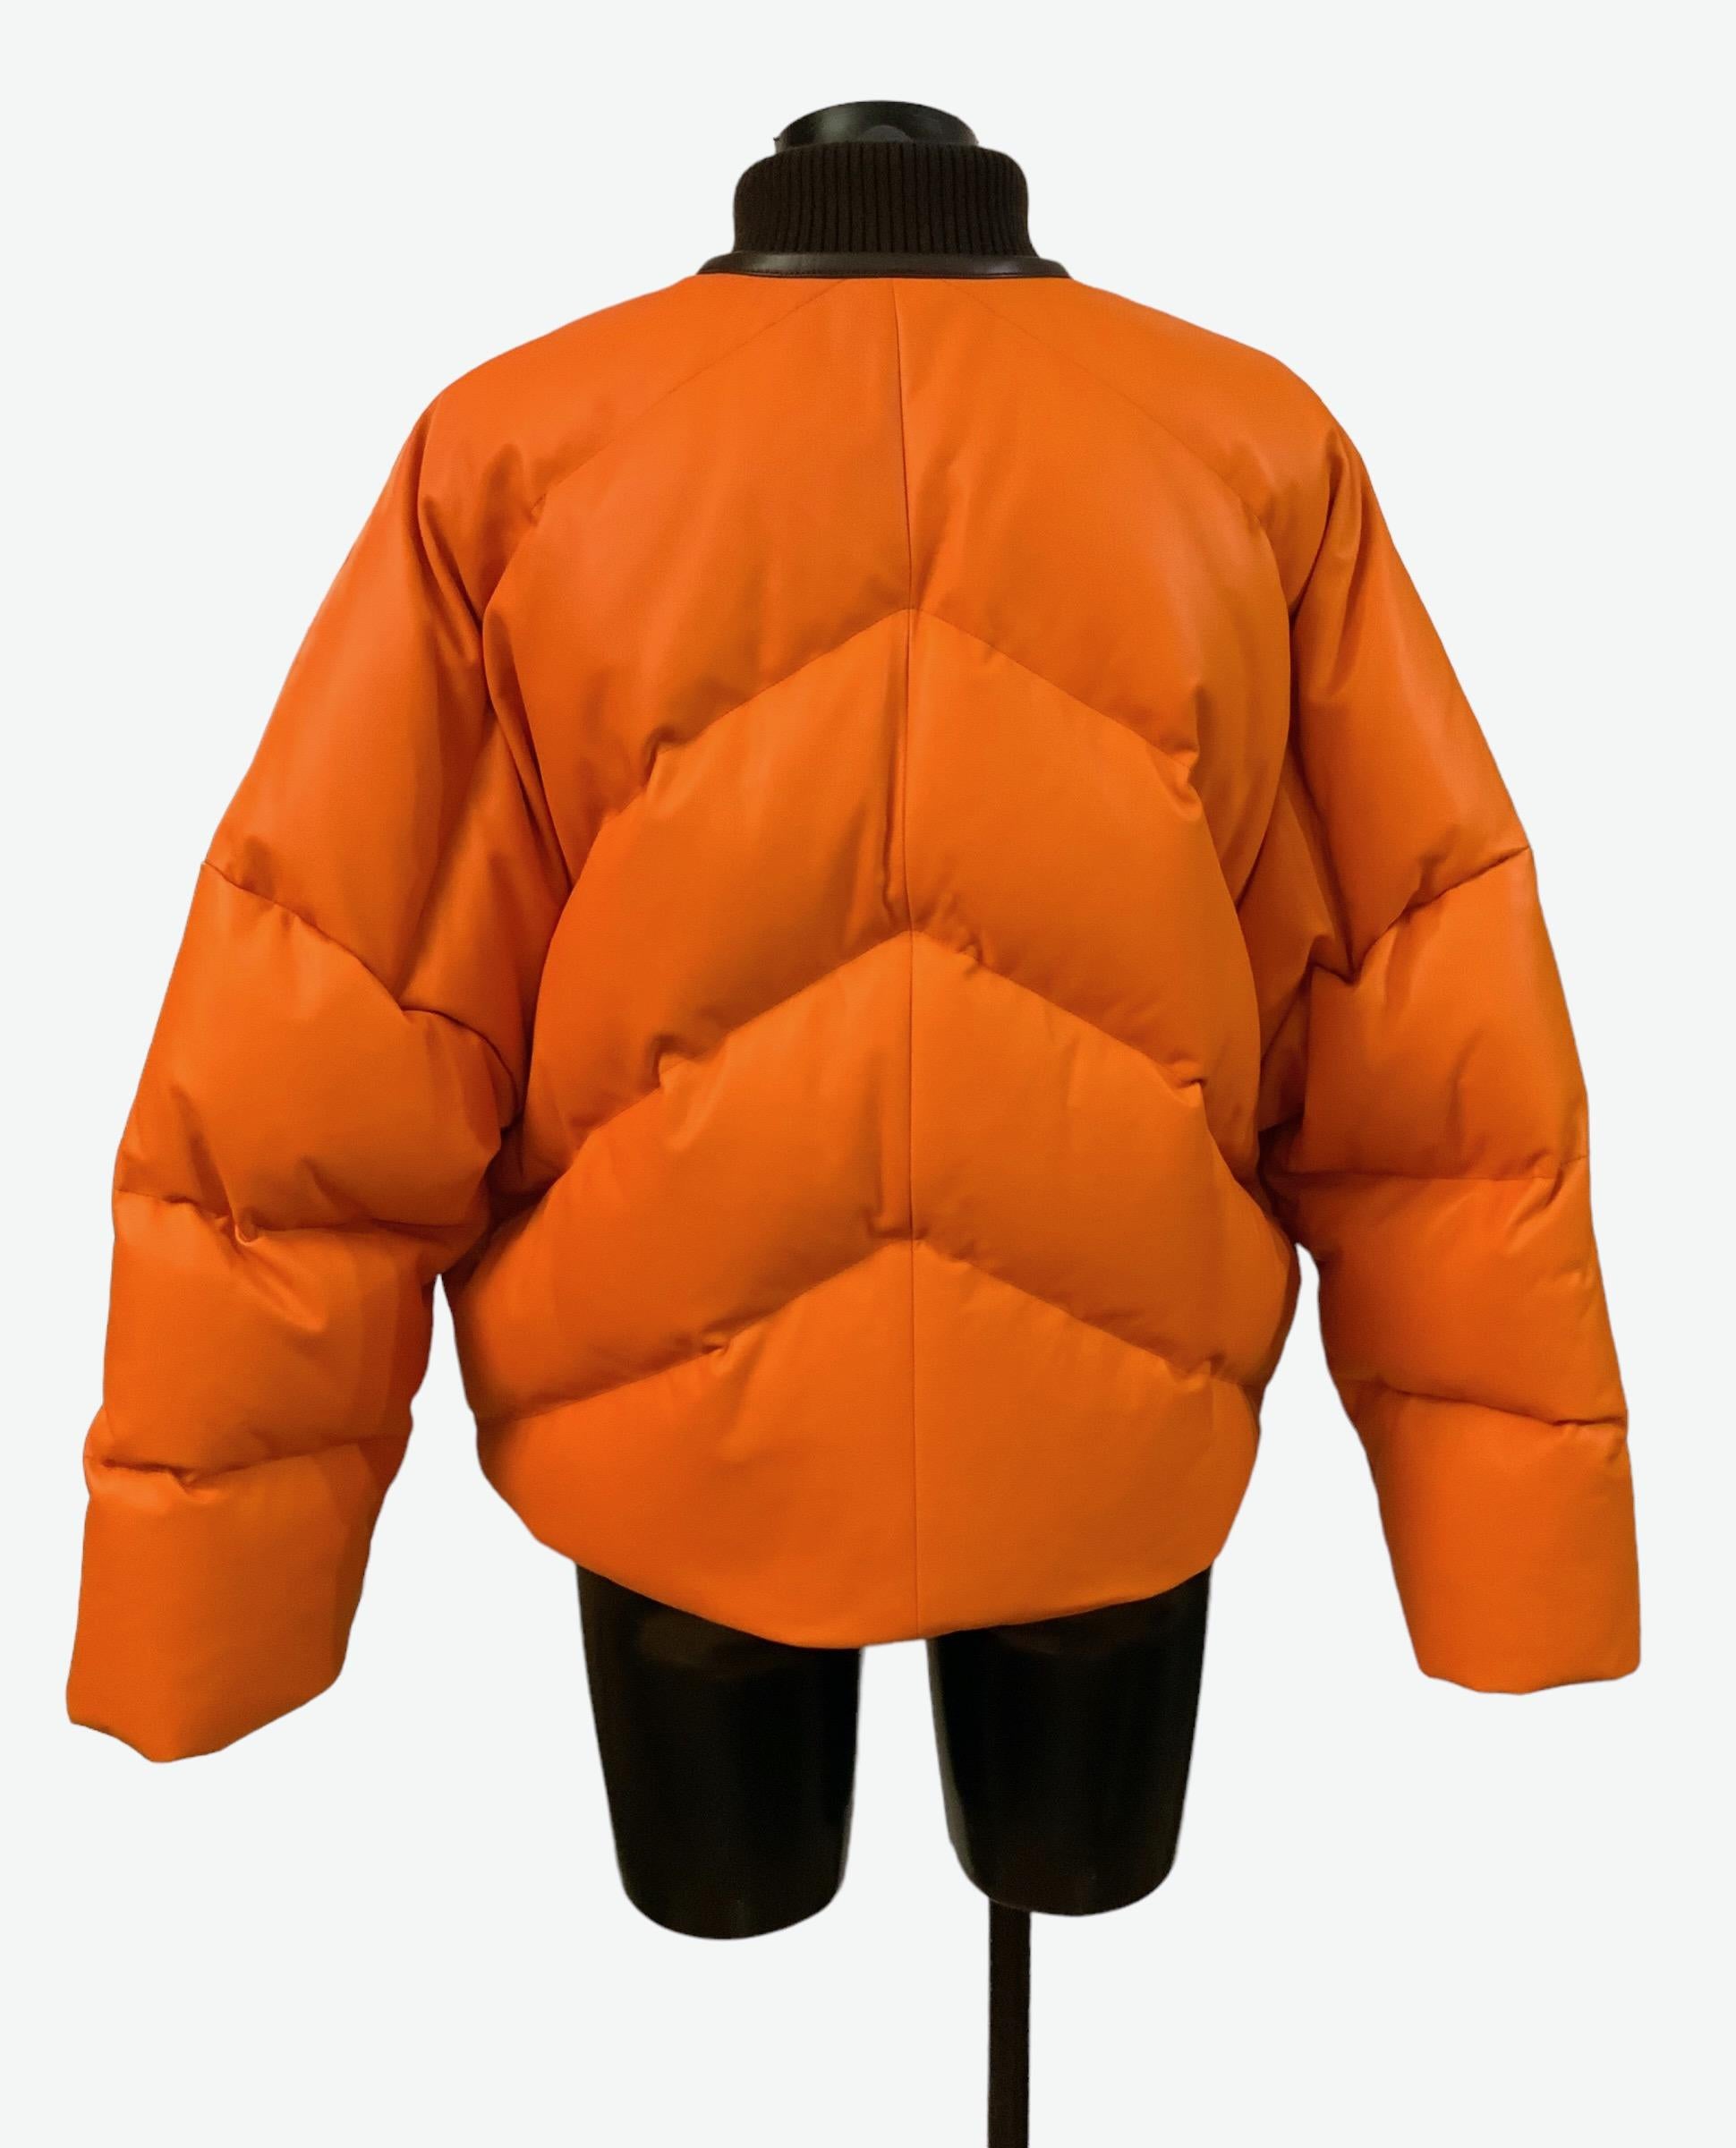 One of a kind for the house of Hermès !
Beautiful immaculate bomber jacket crafted in a very soft orange color calfskin leather.
The trims are made of lambskin and the ribs of cashmere.
The jacket is padded with goose down.

Material: Calfskin and